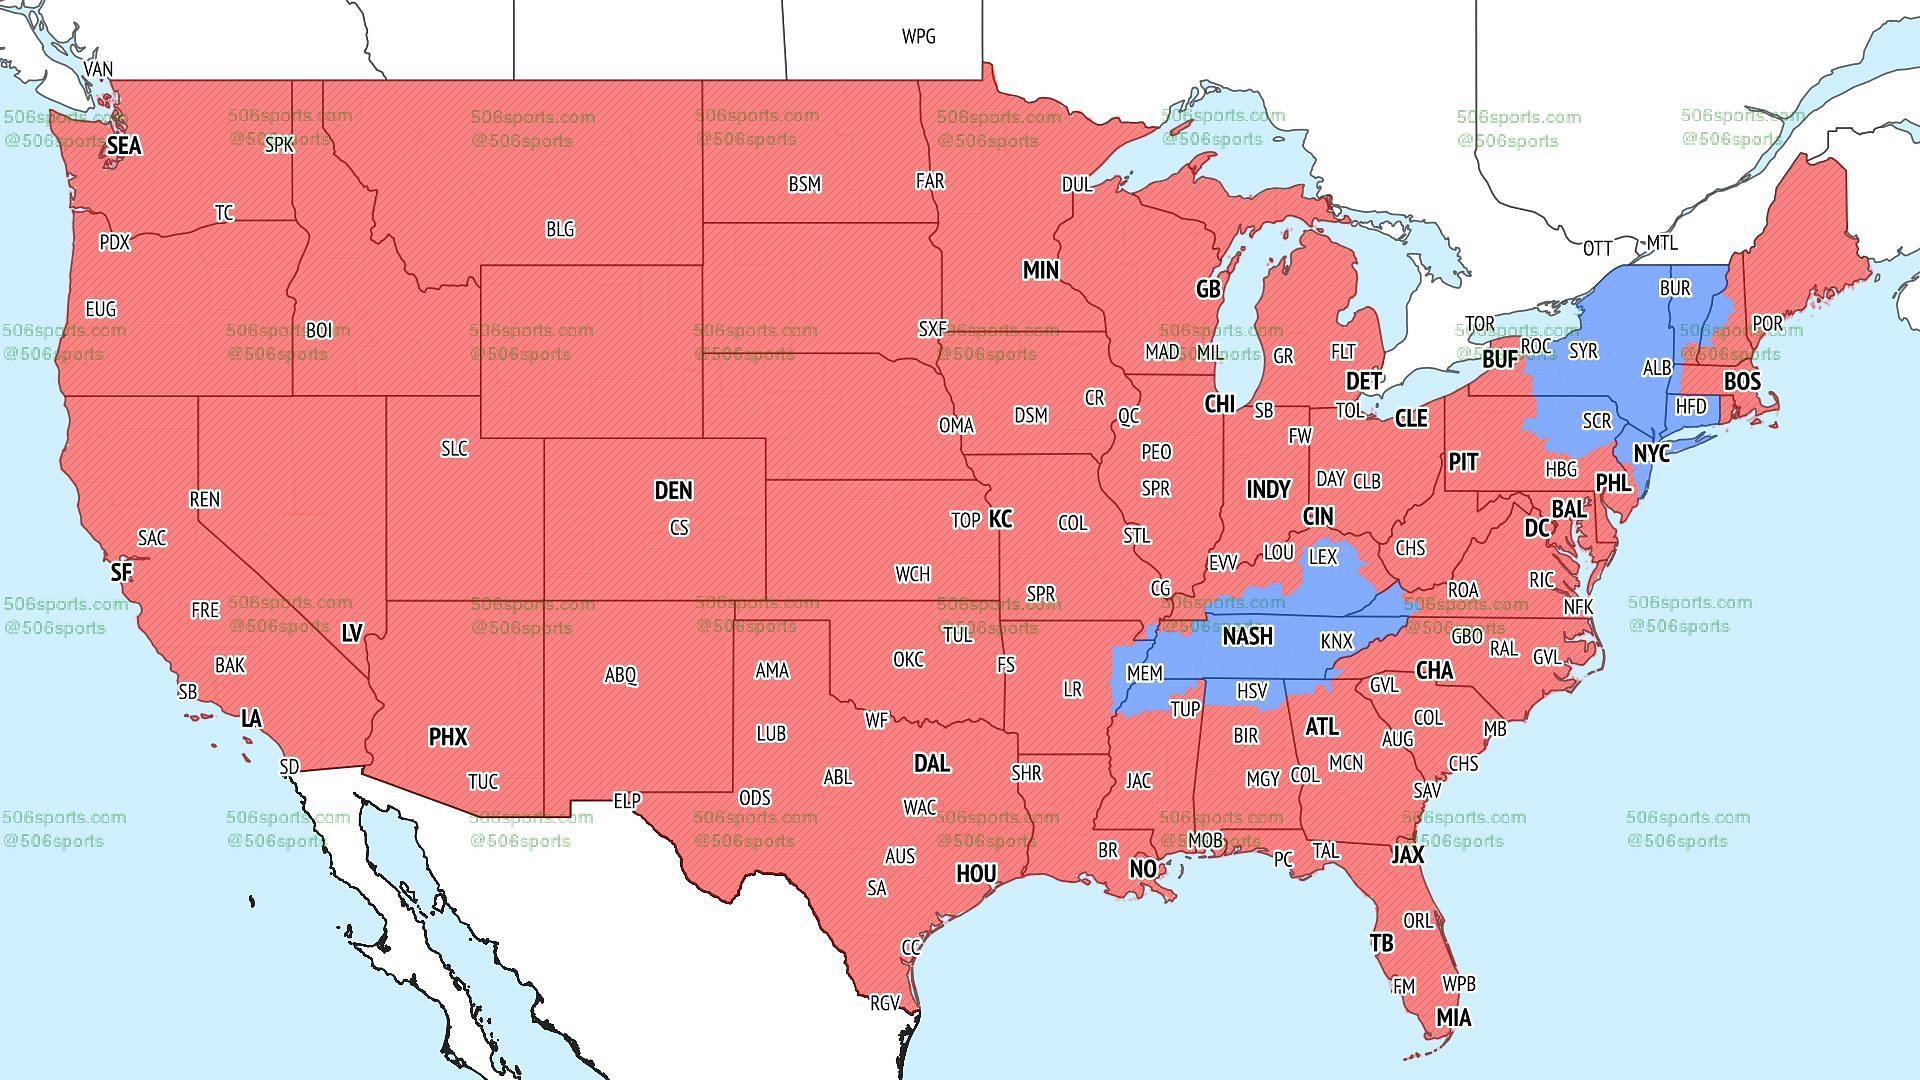 Coverage map for FOX&#039;s late window games. Photo via 506Sports.com